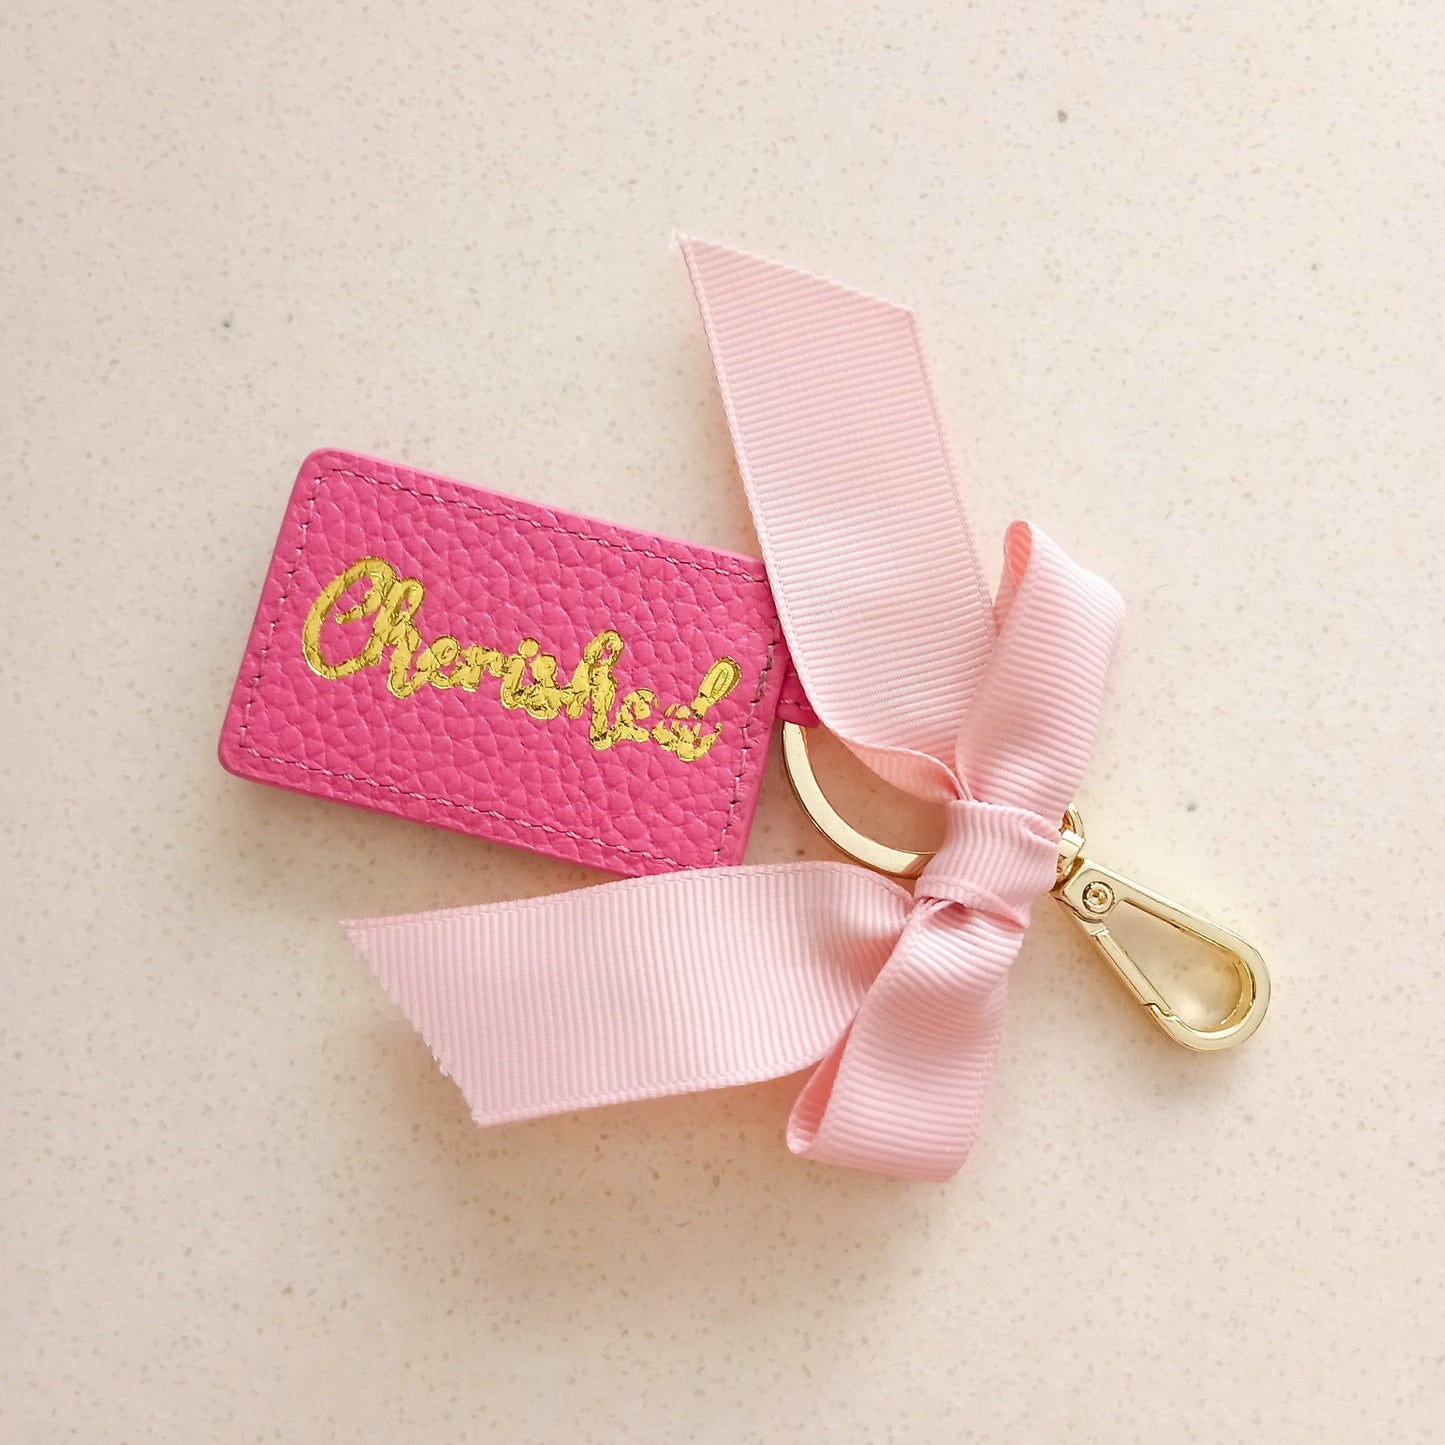 Curatelier Phoebe Pink Leather Envelope Keychain Bag Charm (Cherished)